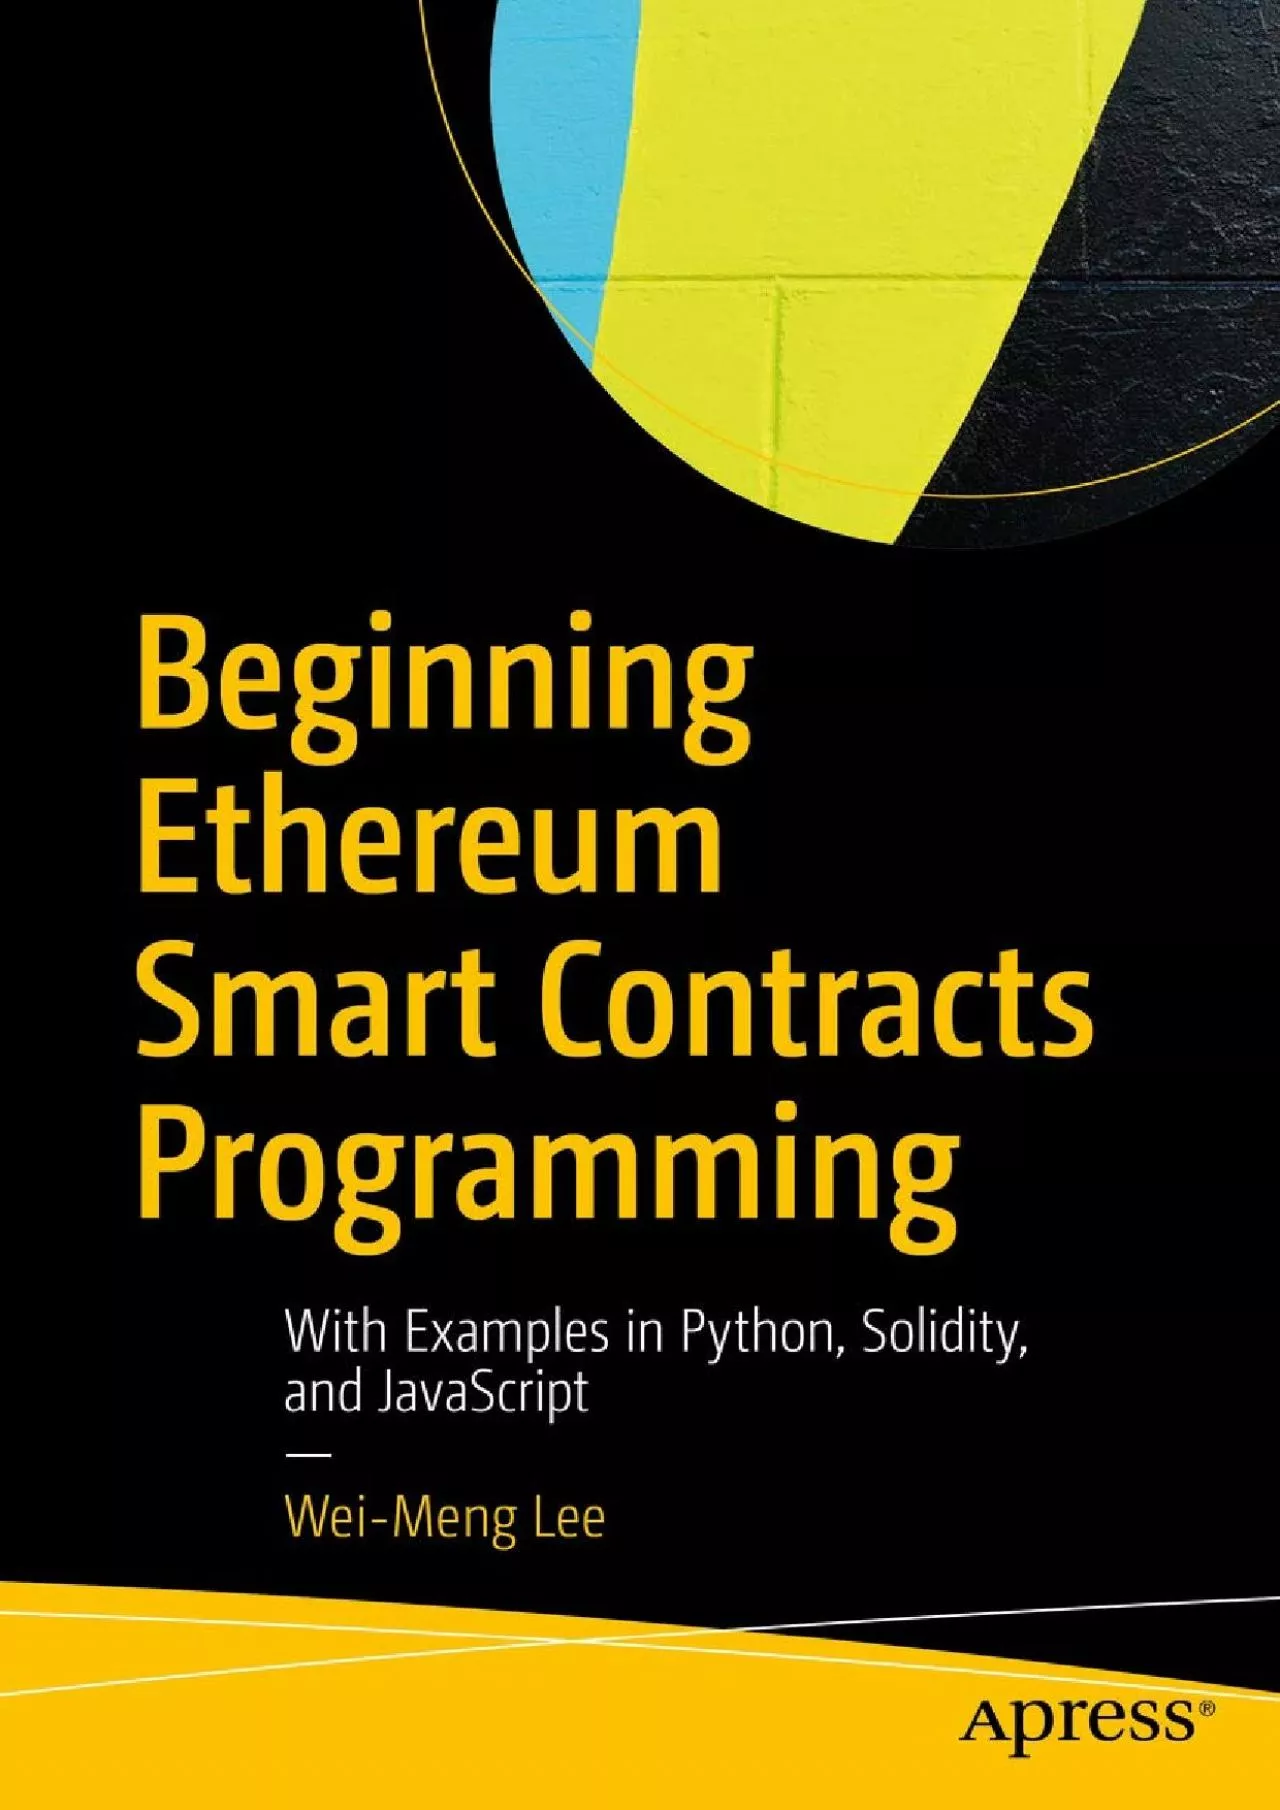 [FREE]-Beginning Ethereum Smart Contracts Programming With Examples in Python, Solidity,